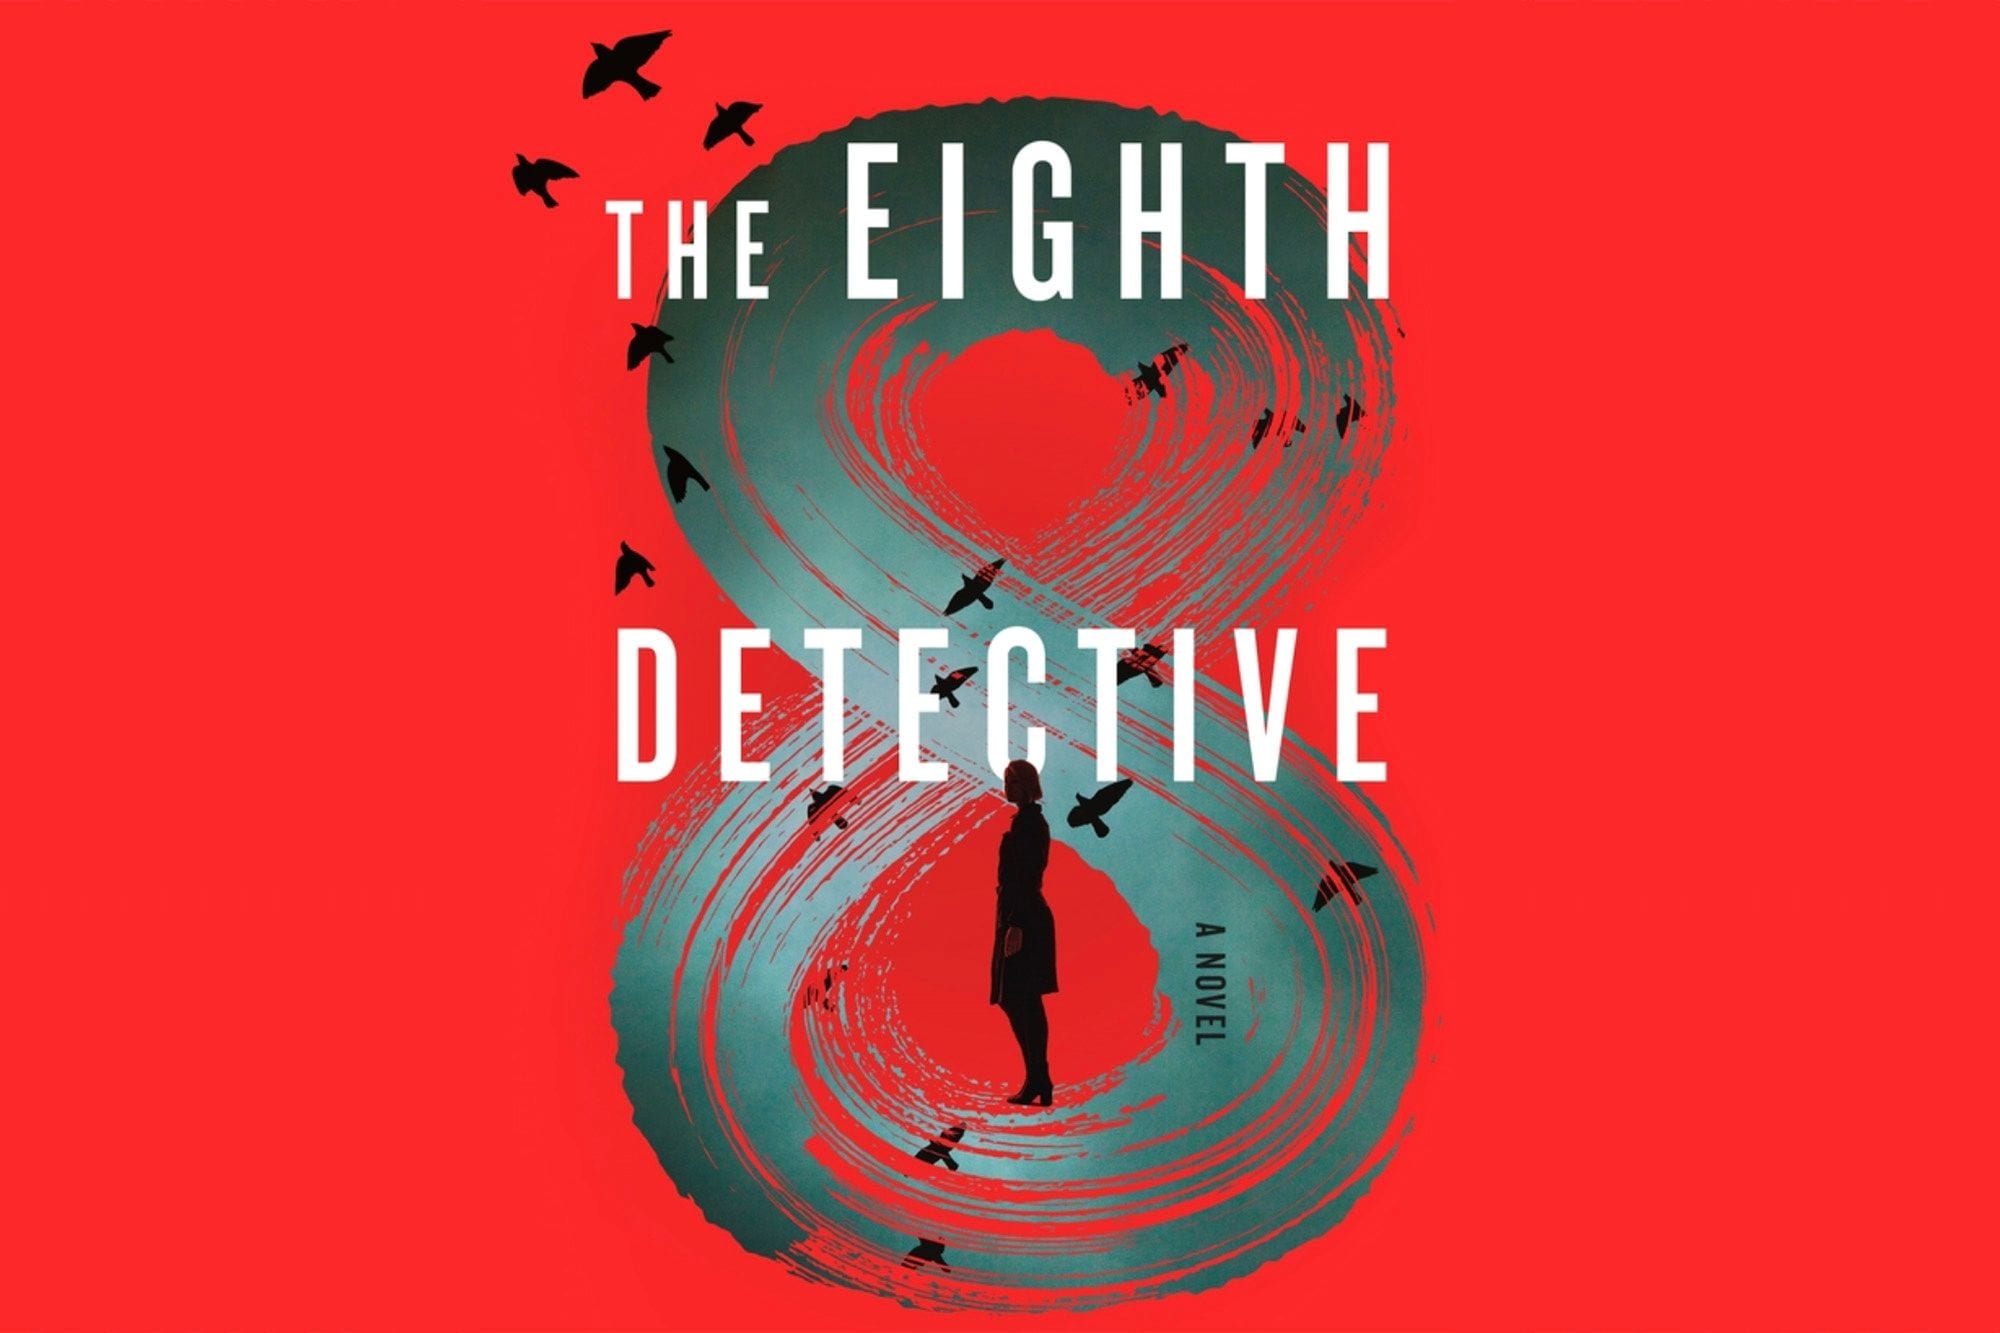 Murder Is Most Factorial in ‘Eighth Detective’